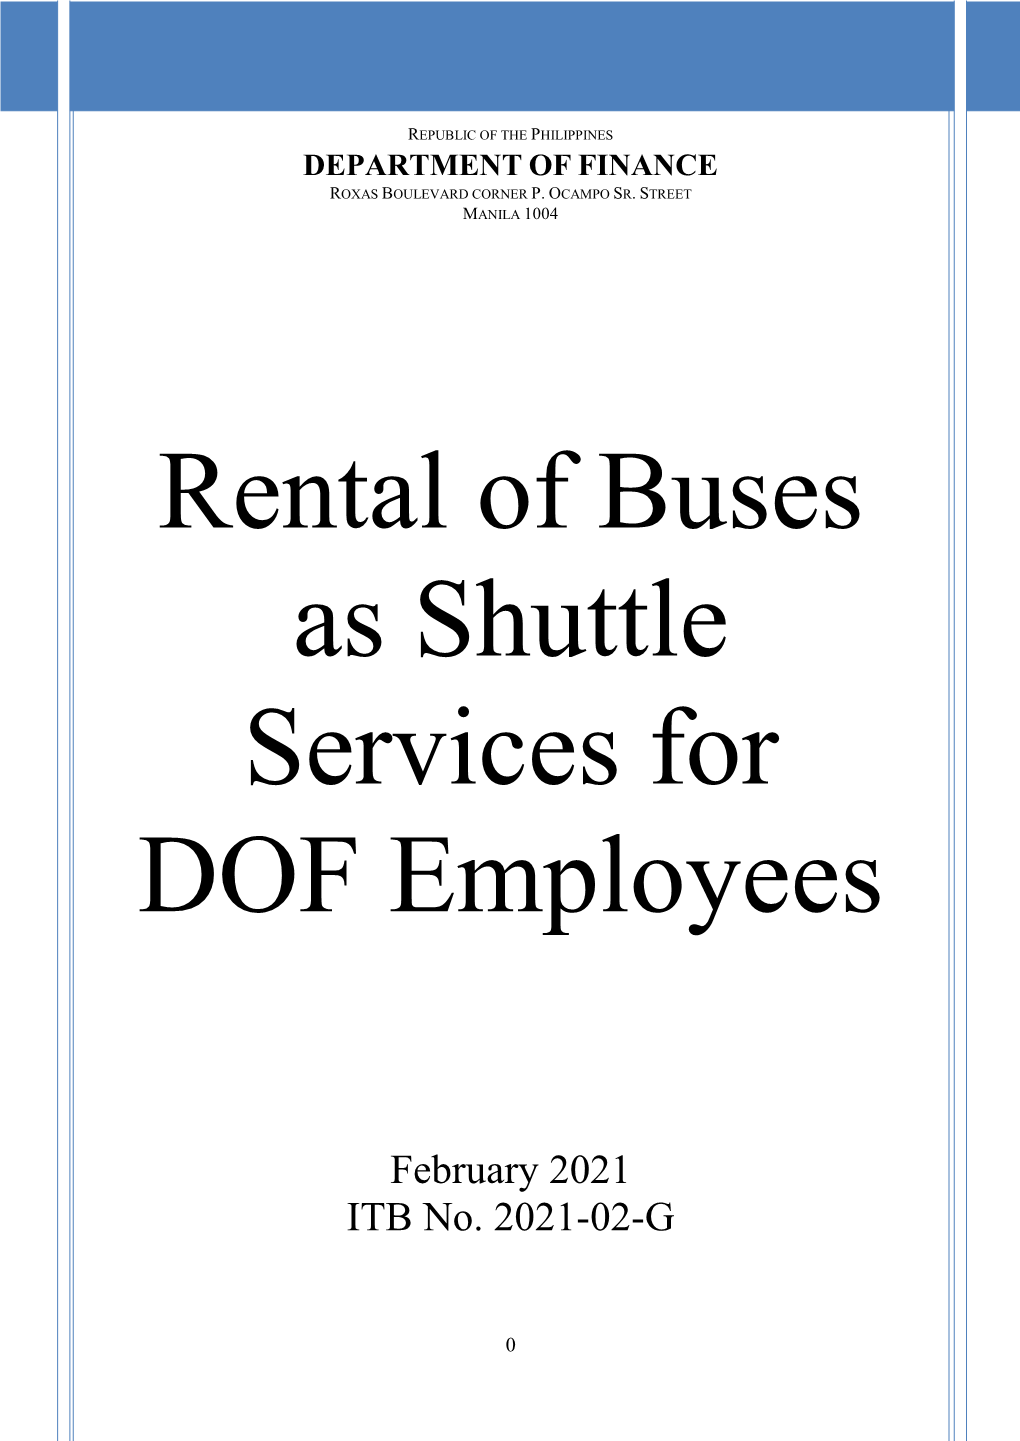 Rental of Buses As Shuttle Services for Dof Employees